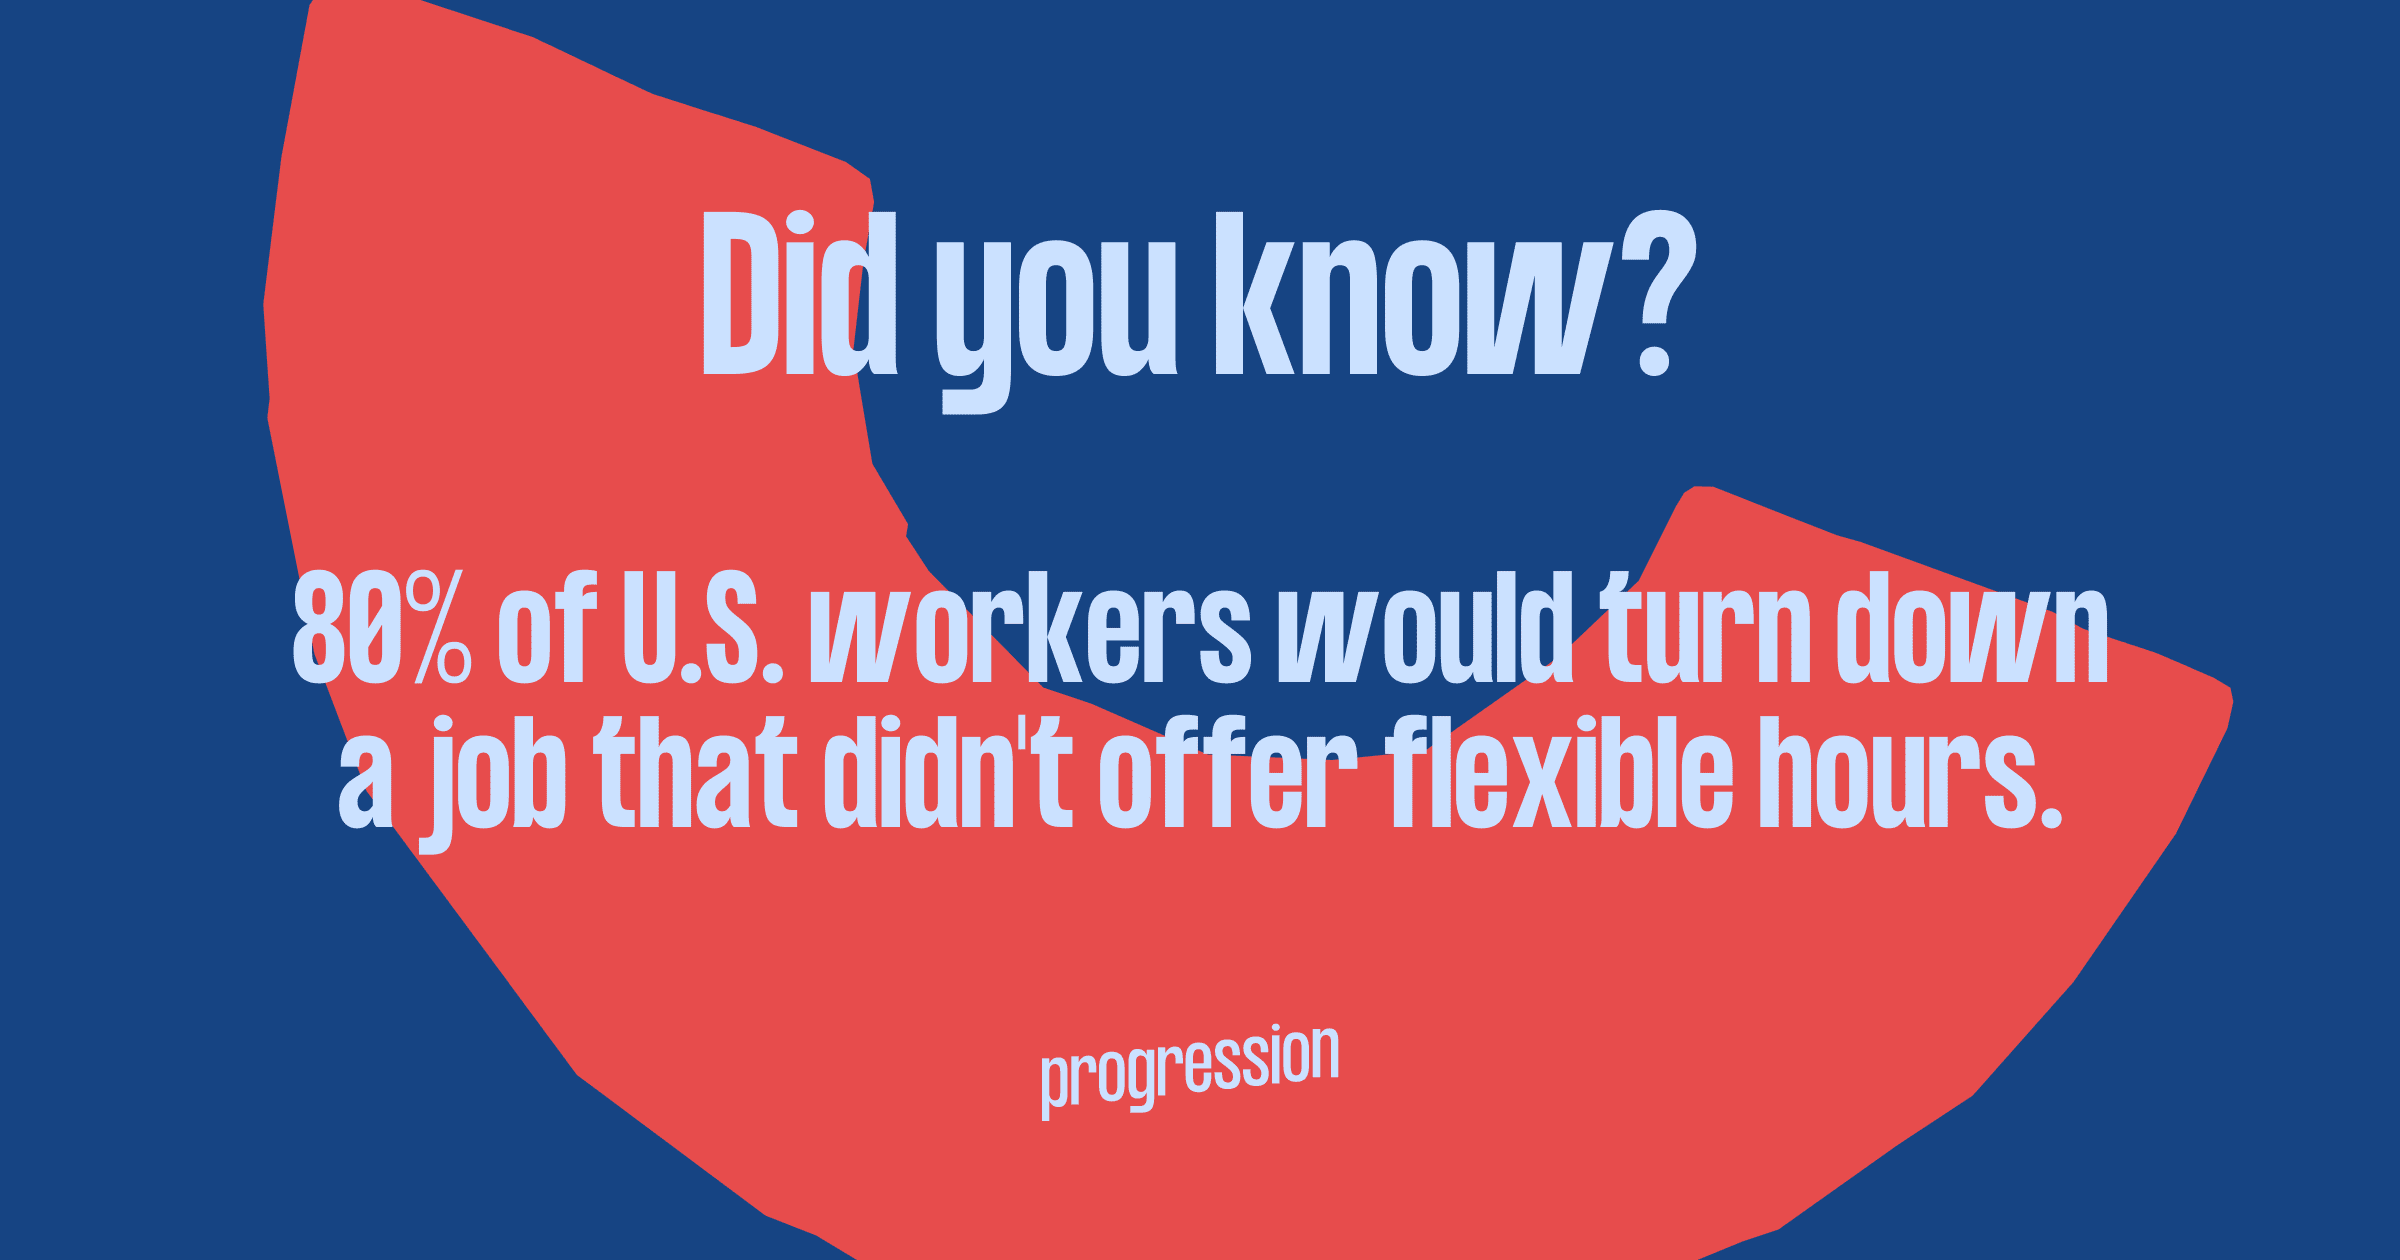 Graphic quoting how 80% of U.S. workers would turn down a job without flexible hours